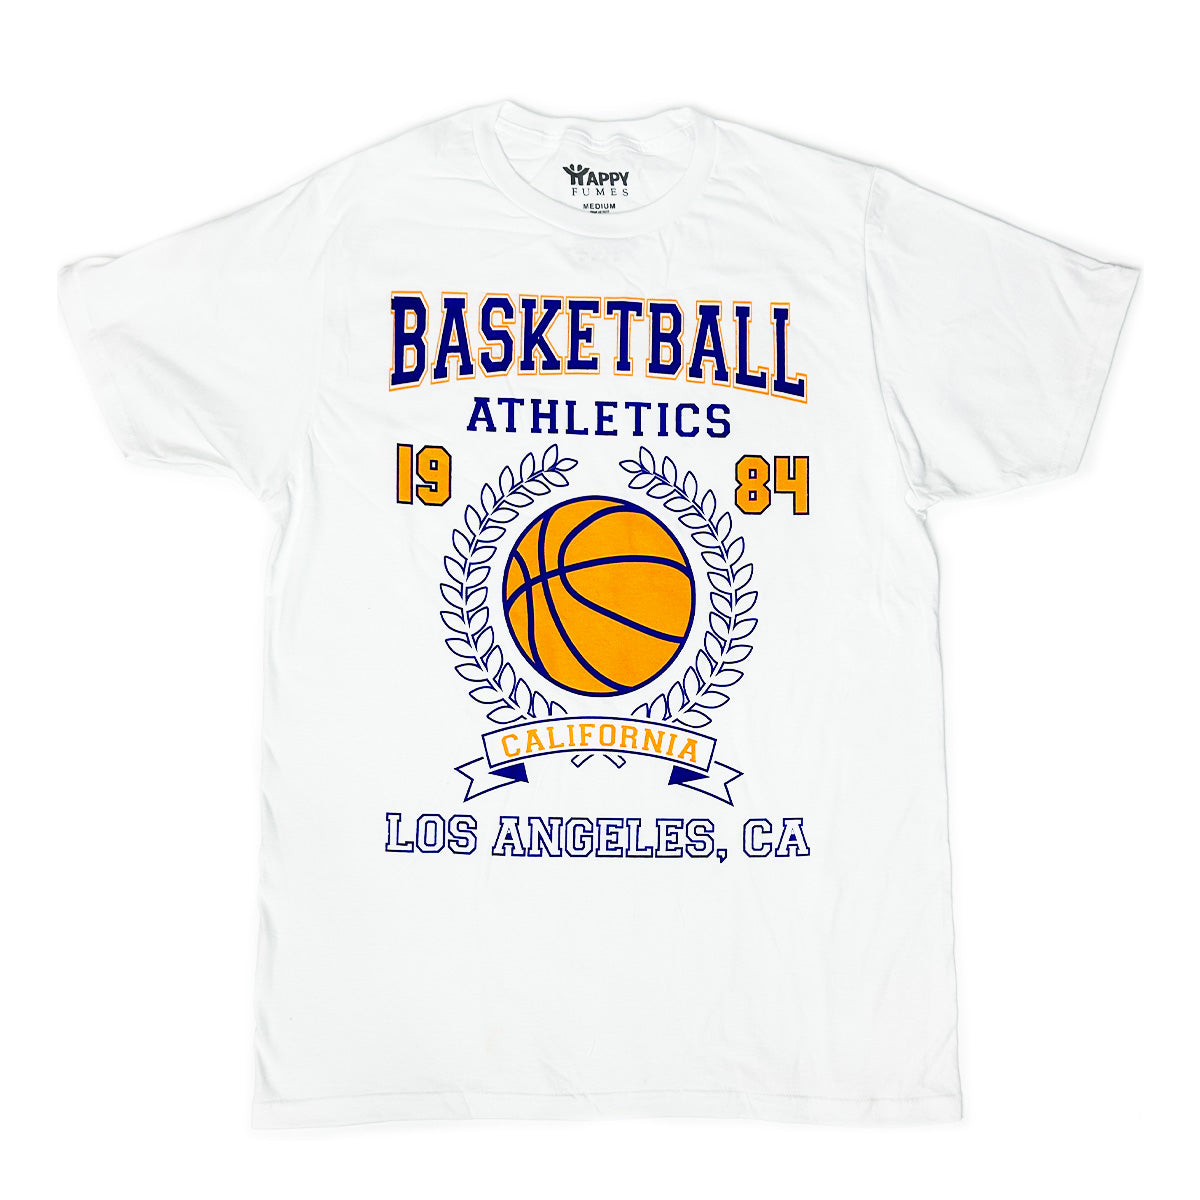 Basketball White - Pack of 6 Units  1S, 2M, 2L, 1XL